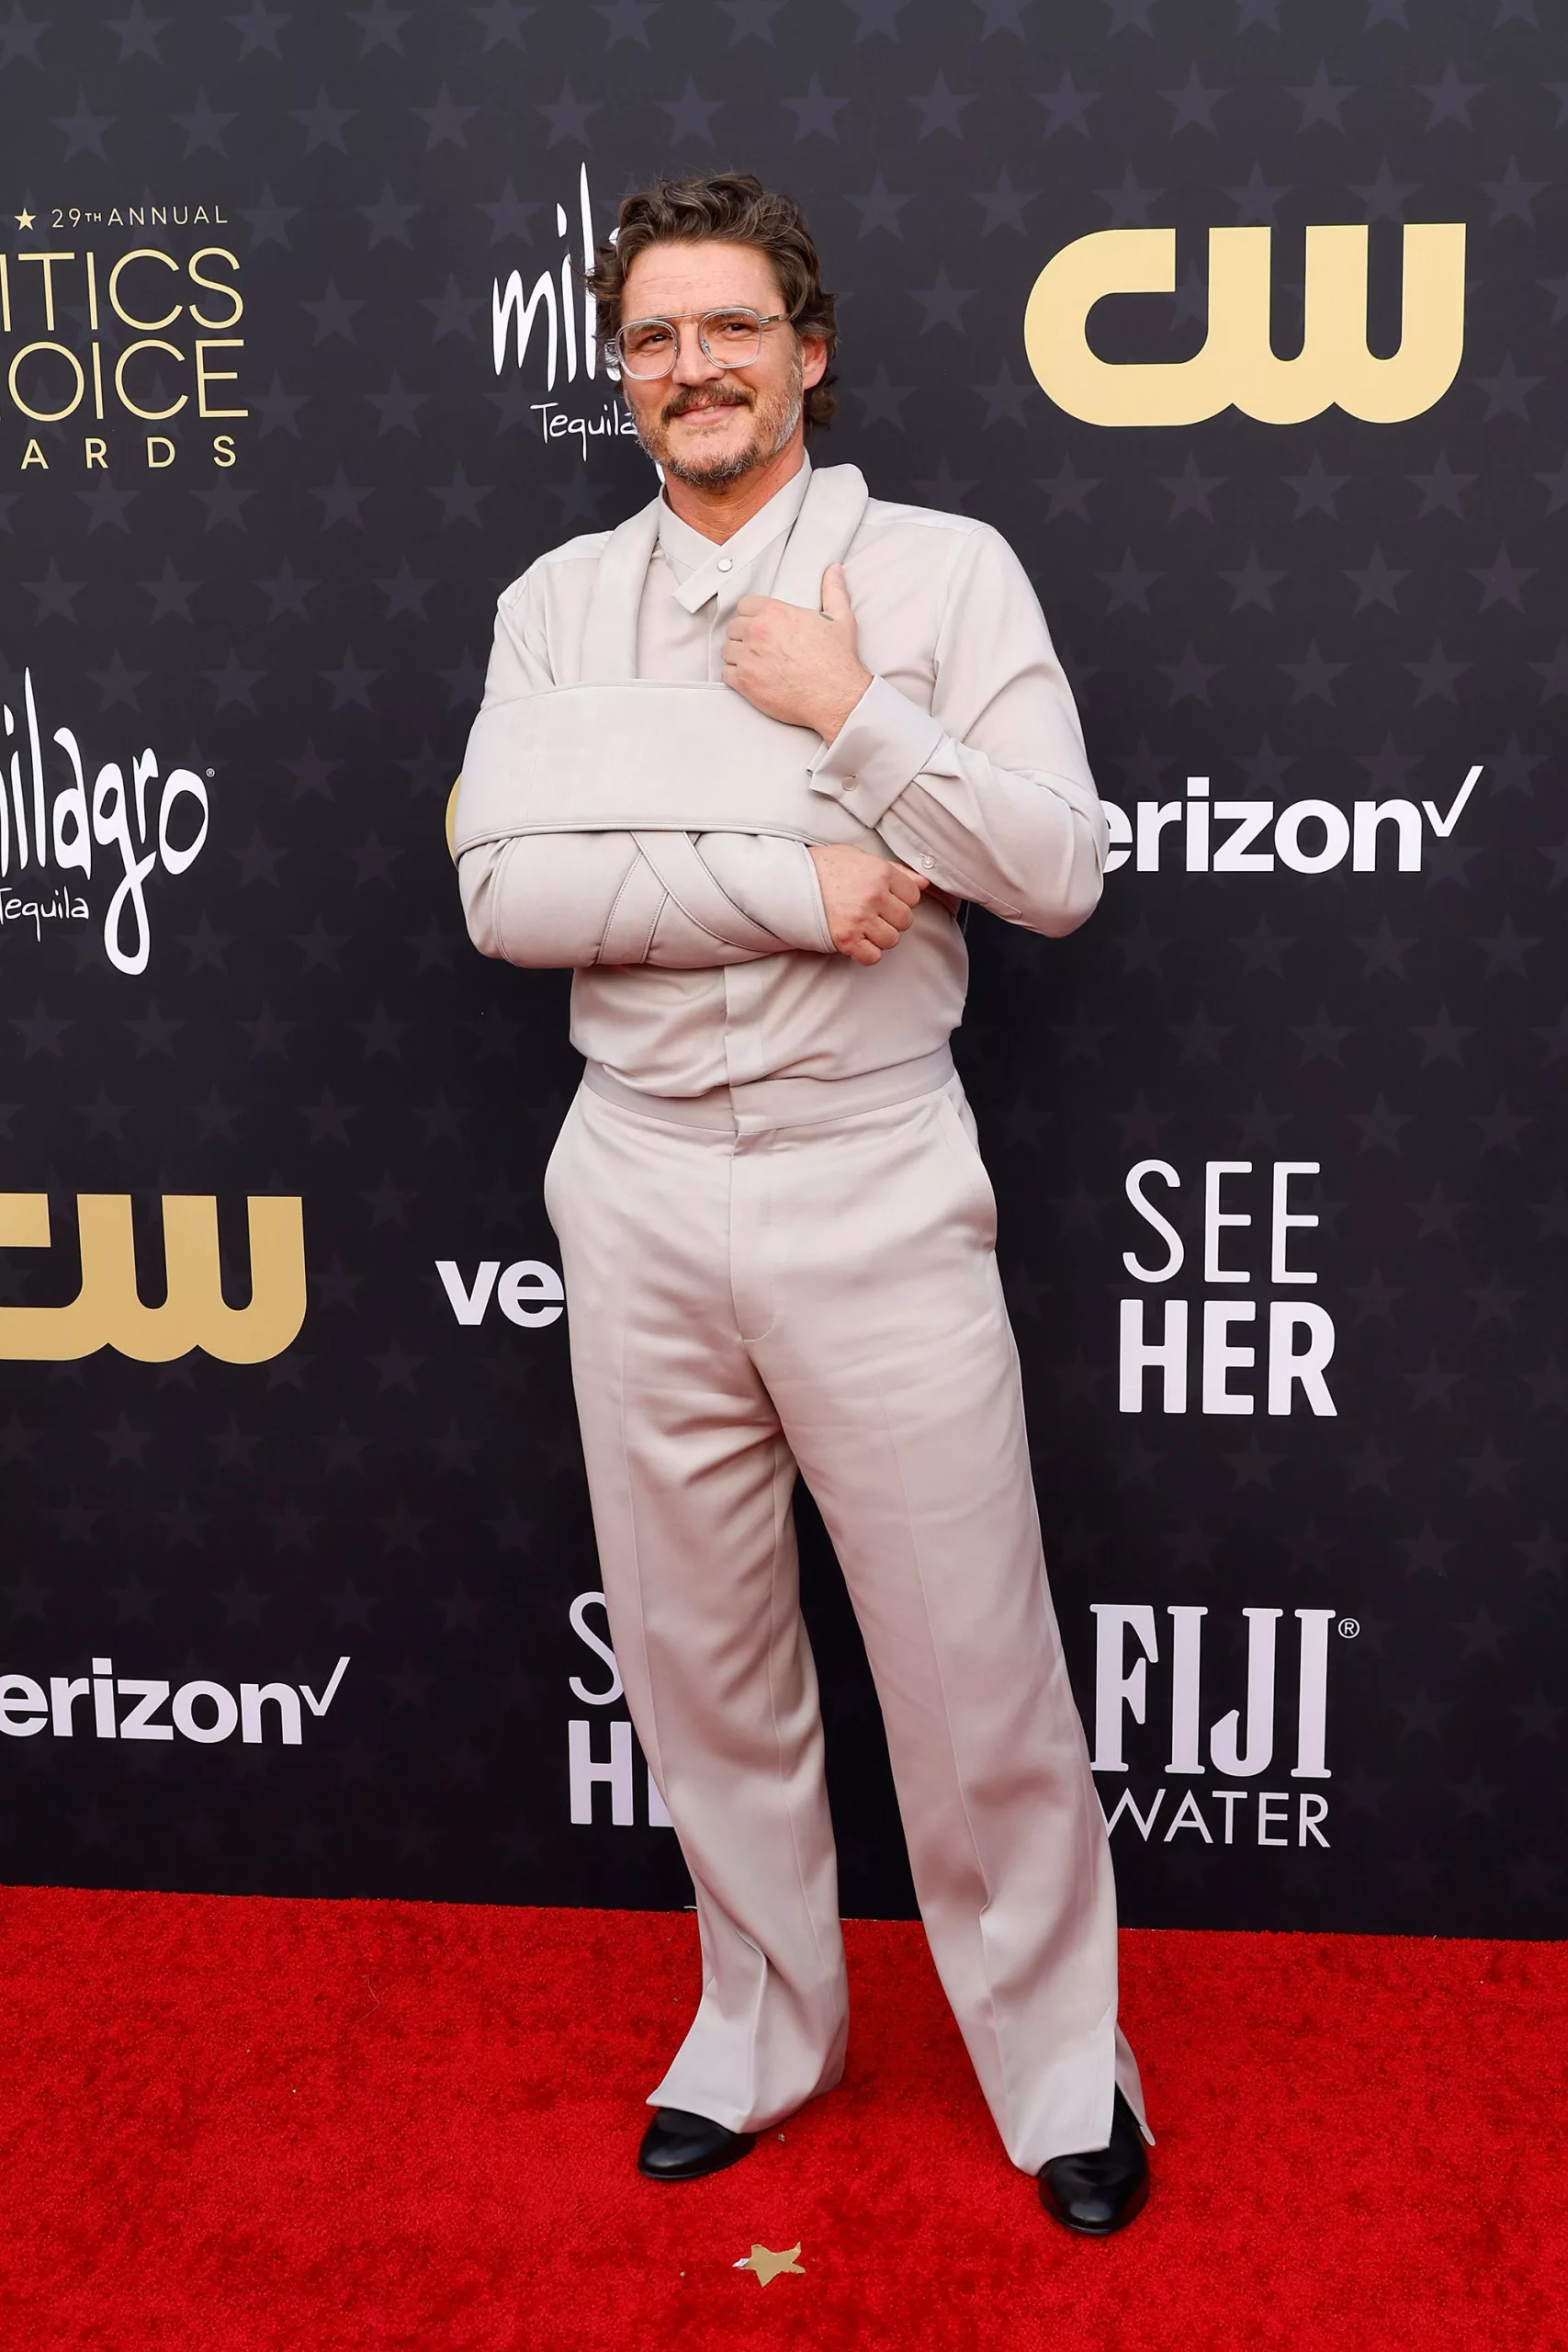 As at last week’s Golden Globes, Pedro Pascal incorporated his arm sling into his look — this time, a gray-beige outfit paired with clear spectacles and black shoes.